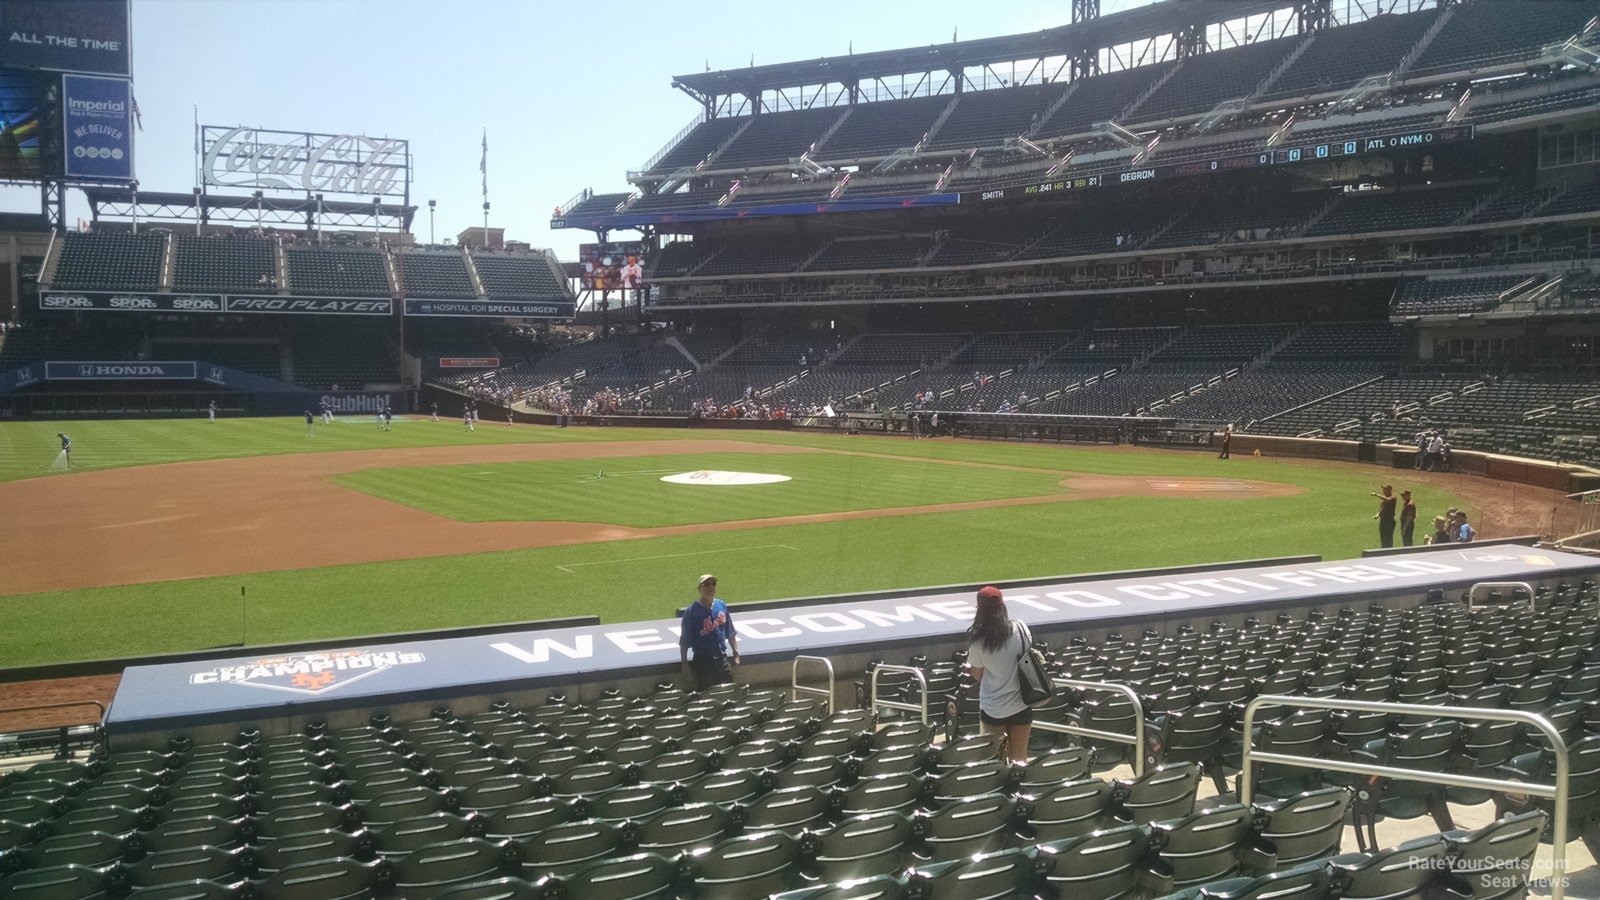 section 123, row 14 seat view  - citi field